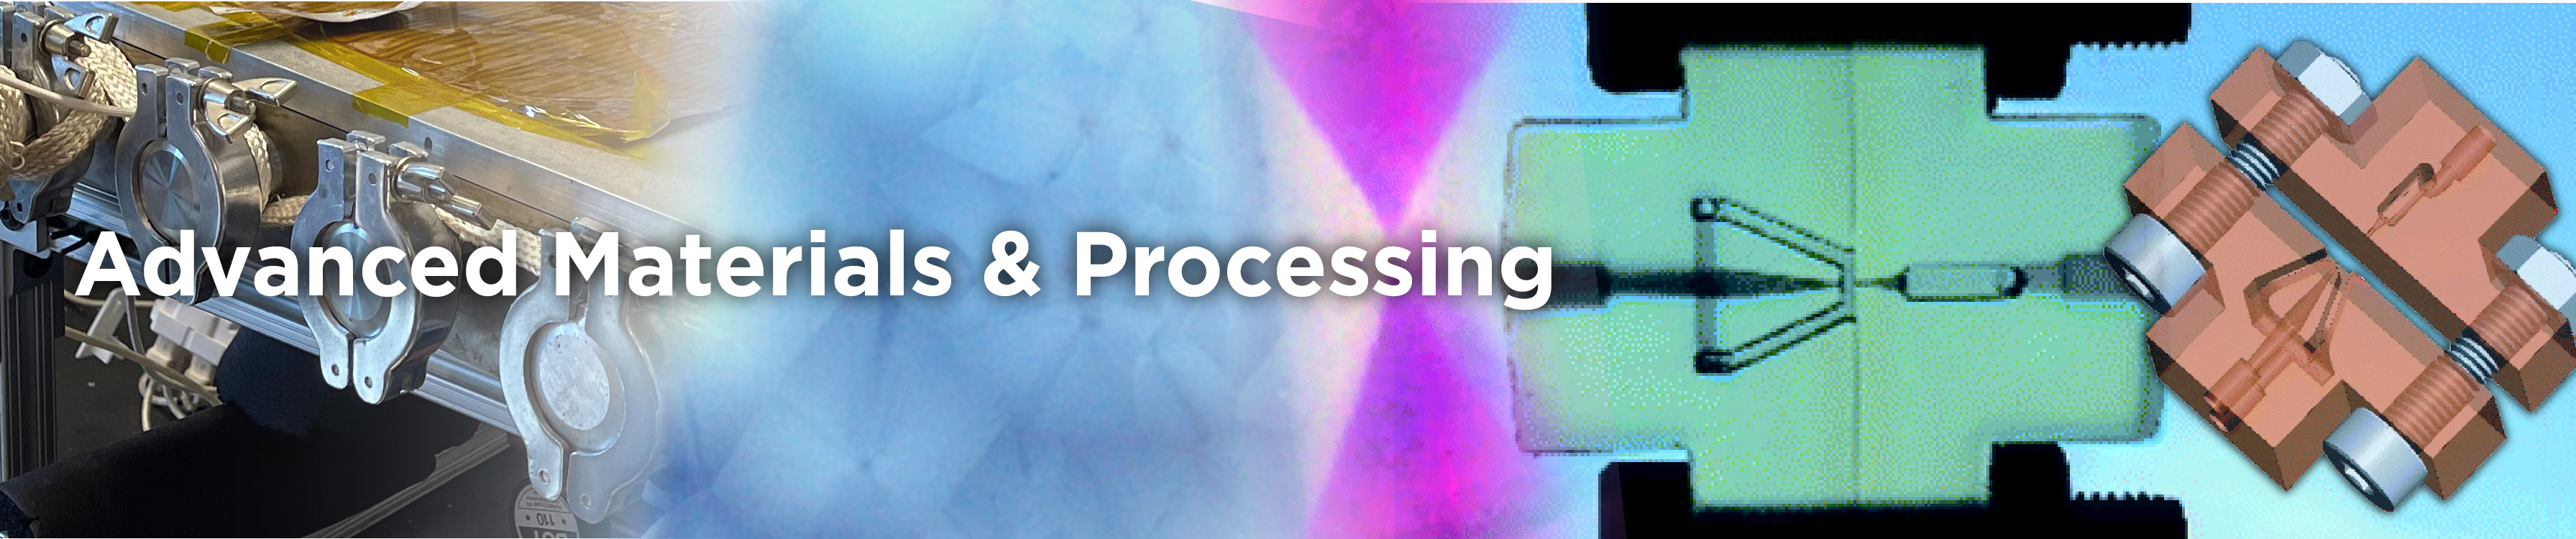 Advanced Materials and Processing